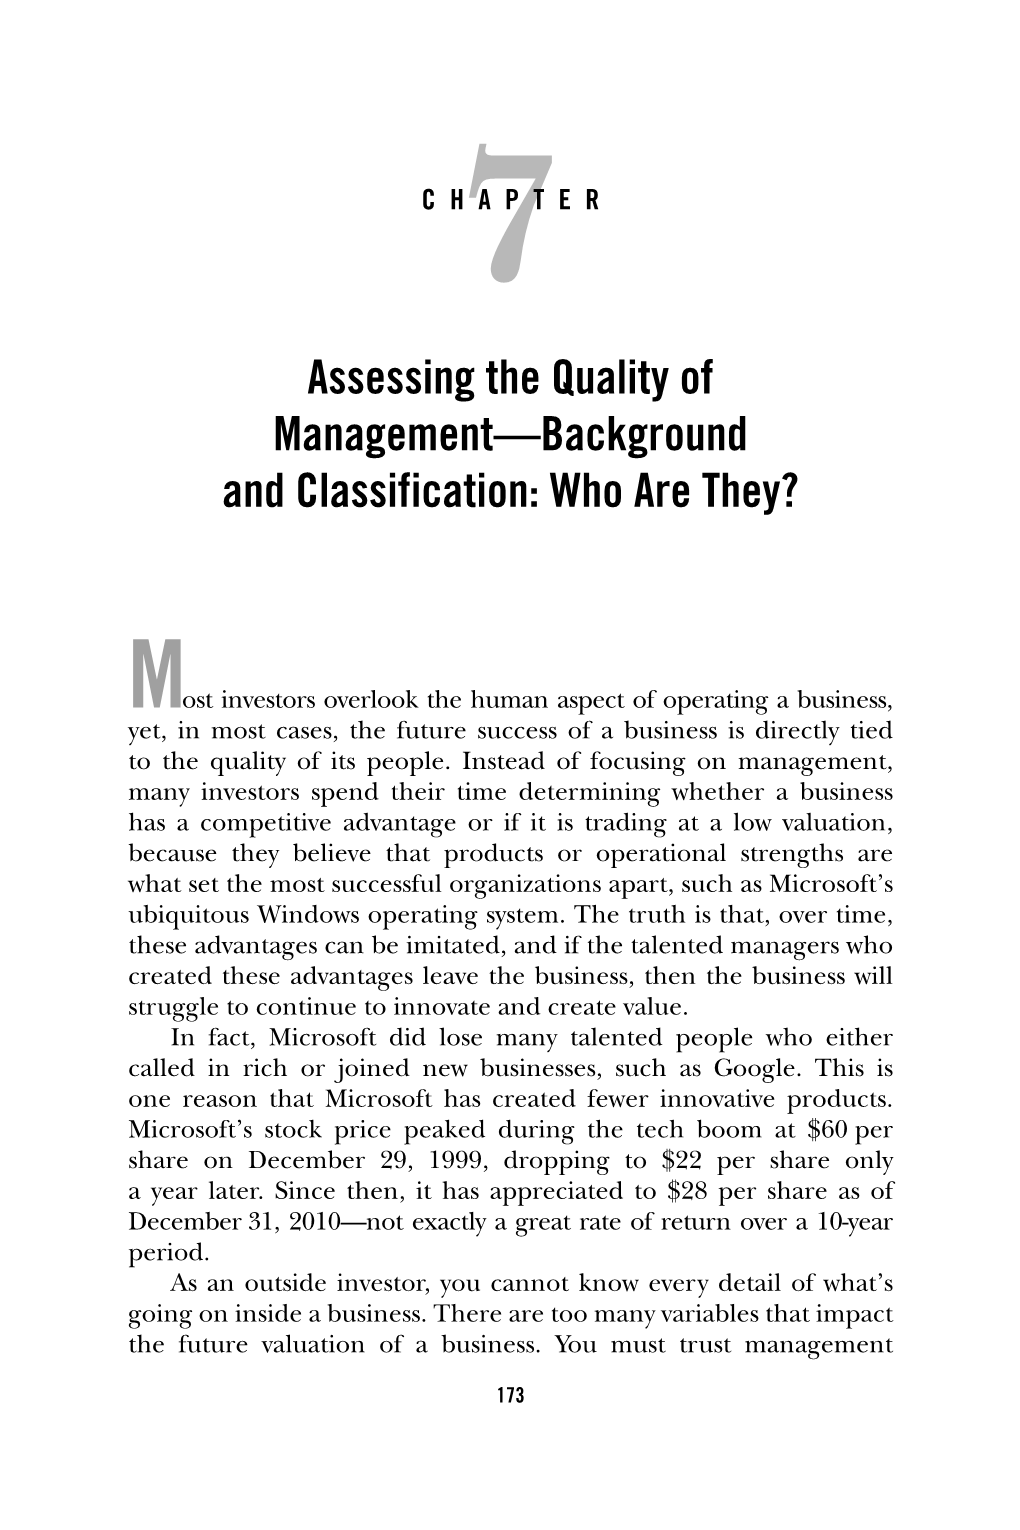 Assessing the Quality of Management—Background and Classification: Who Are They?